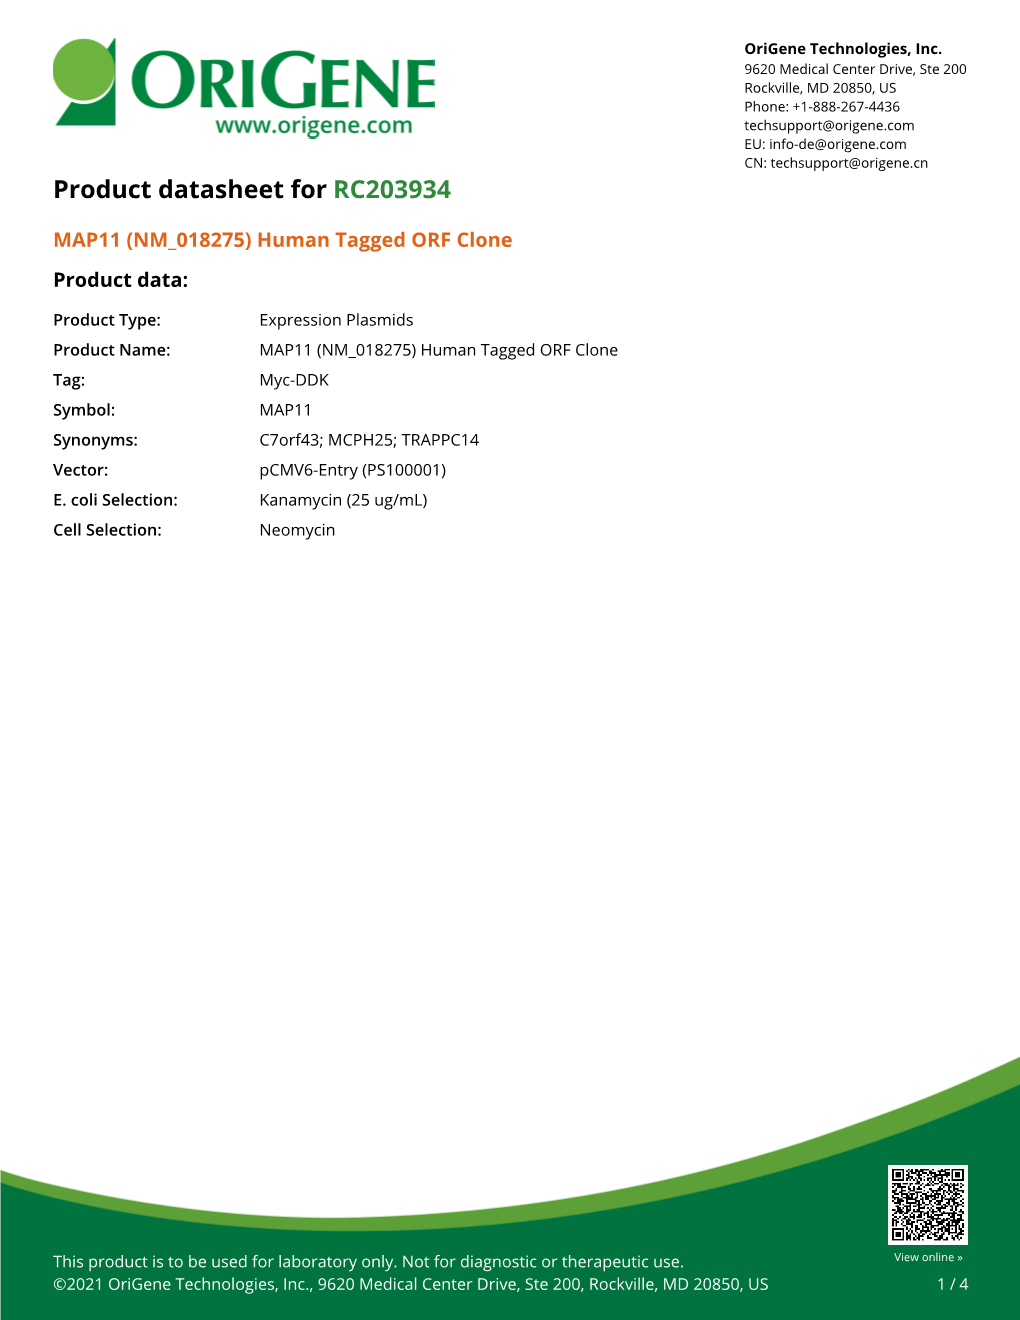 MAP11 (NM 018275) Human Tagged ORF Clone Product Data